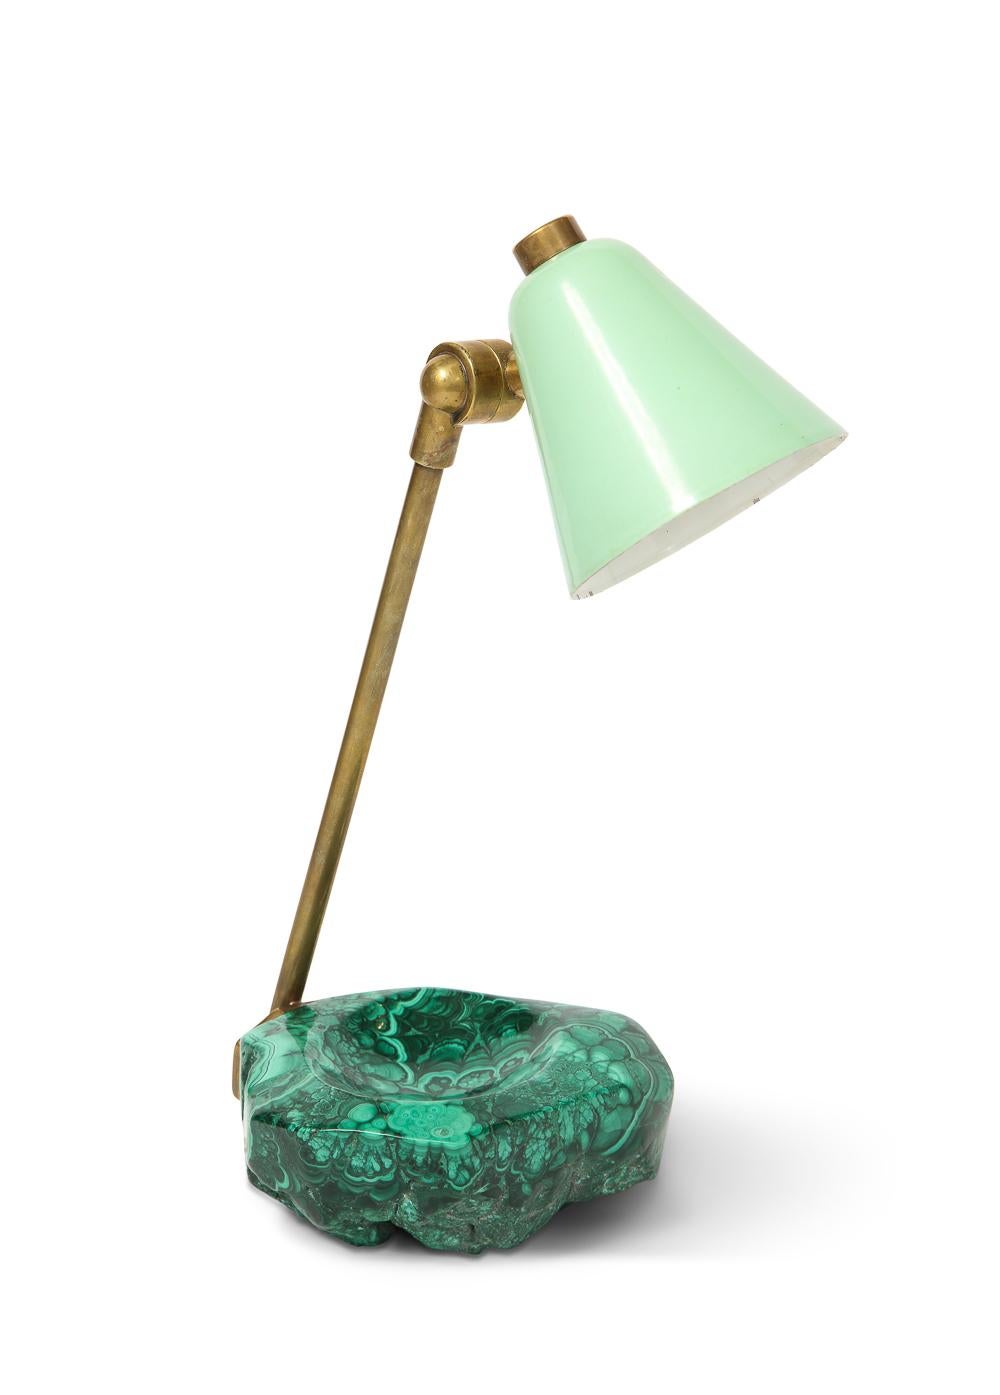 Painted aluminum, brass, malachite lamp by Fedele Papagni. Fantastic table lamp of re-purposed vintage materials combined to create a small series of one-off desk lamps. Wiring and socket have been recently updated.